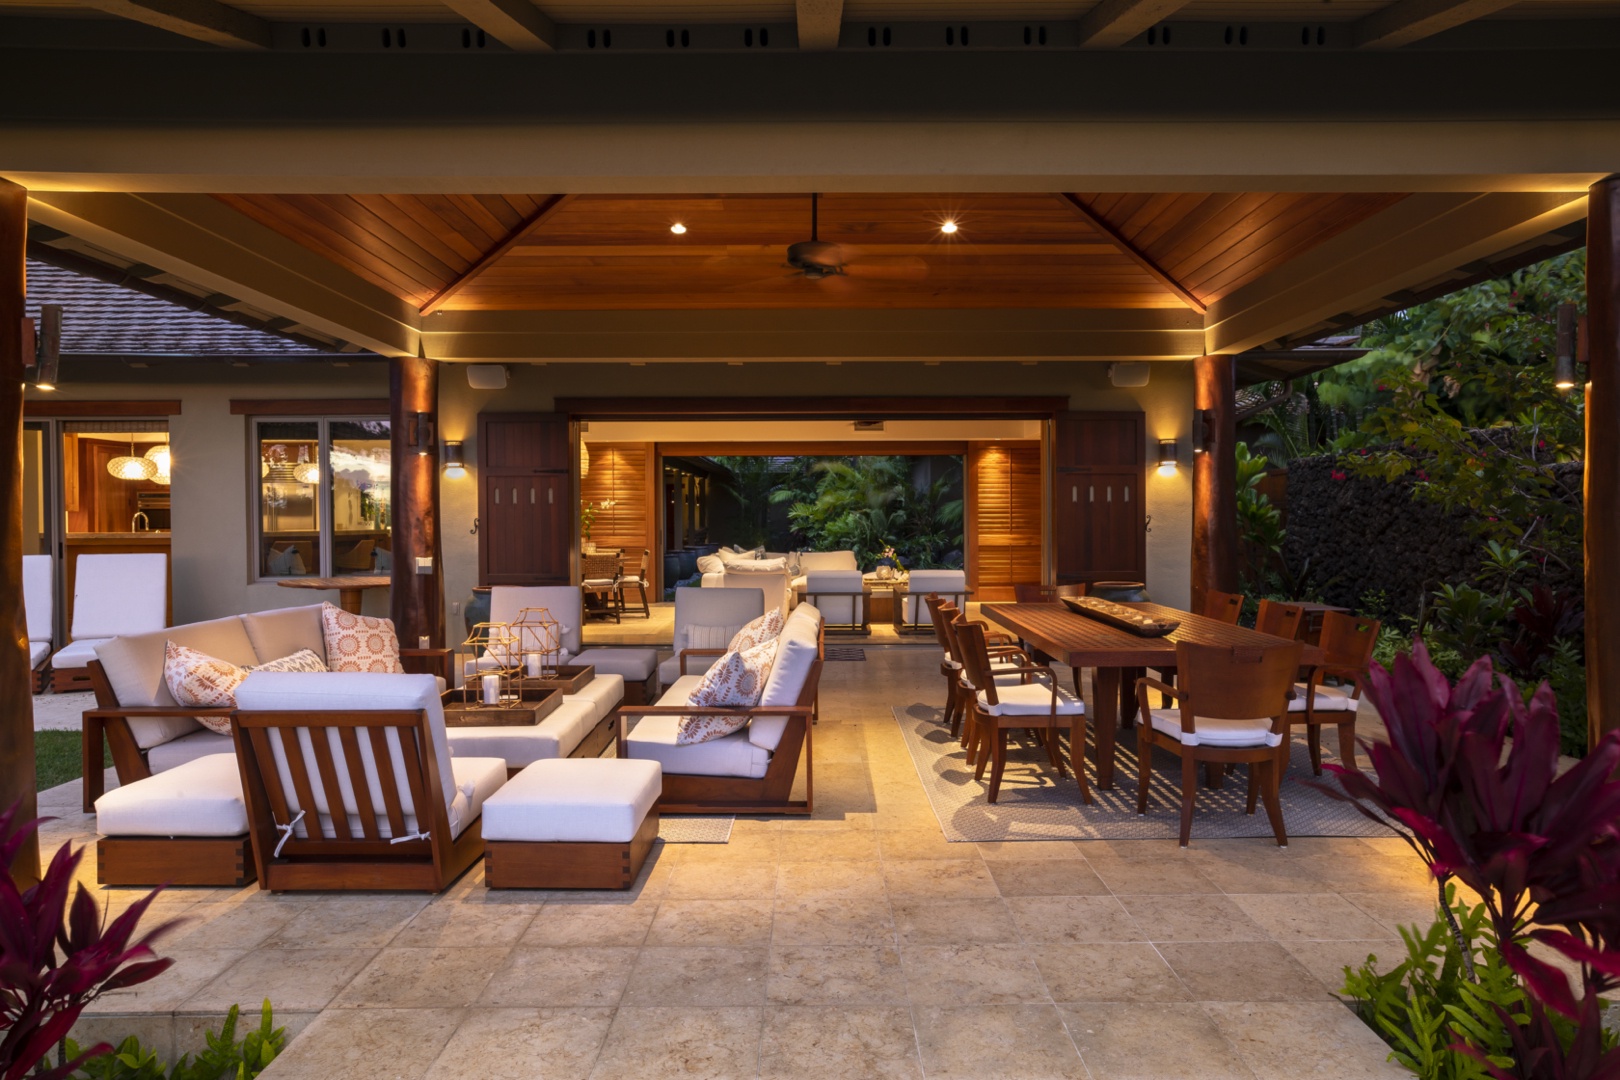 Kailua Kona Vacation Rentals, 4BD Kahikole Street (218) Estate Home at Four Seasons Resort at Hualalai - Generous outdoor & indoor space lit up at twilight, perfect for entertaining